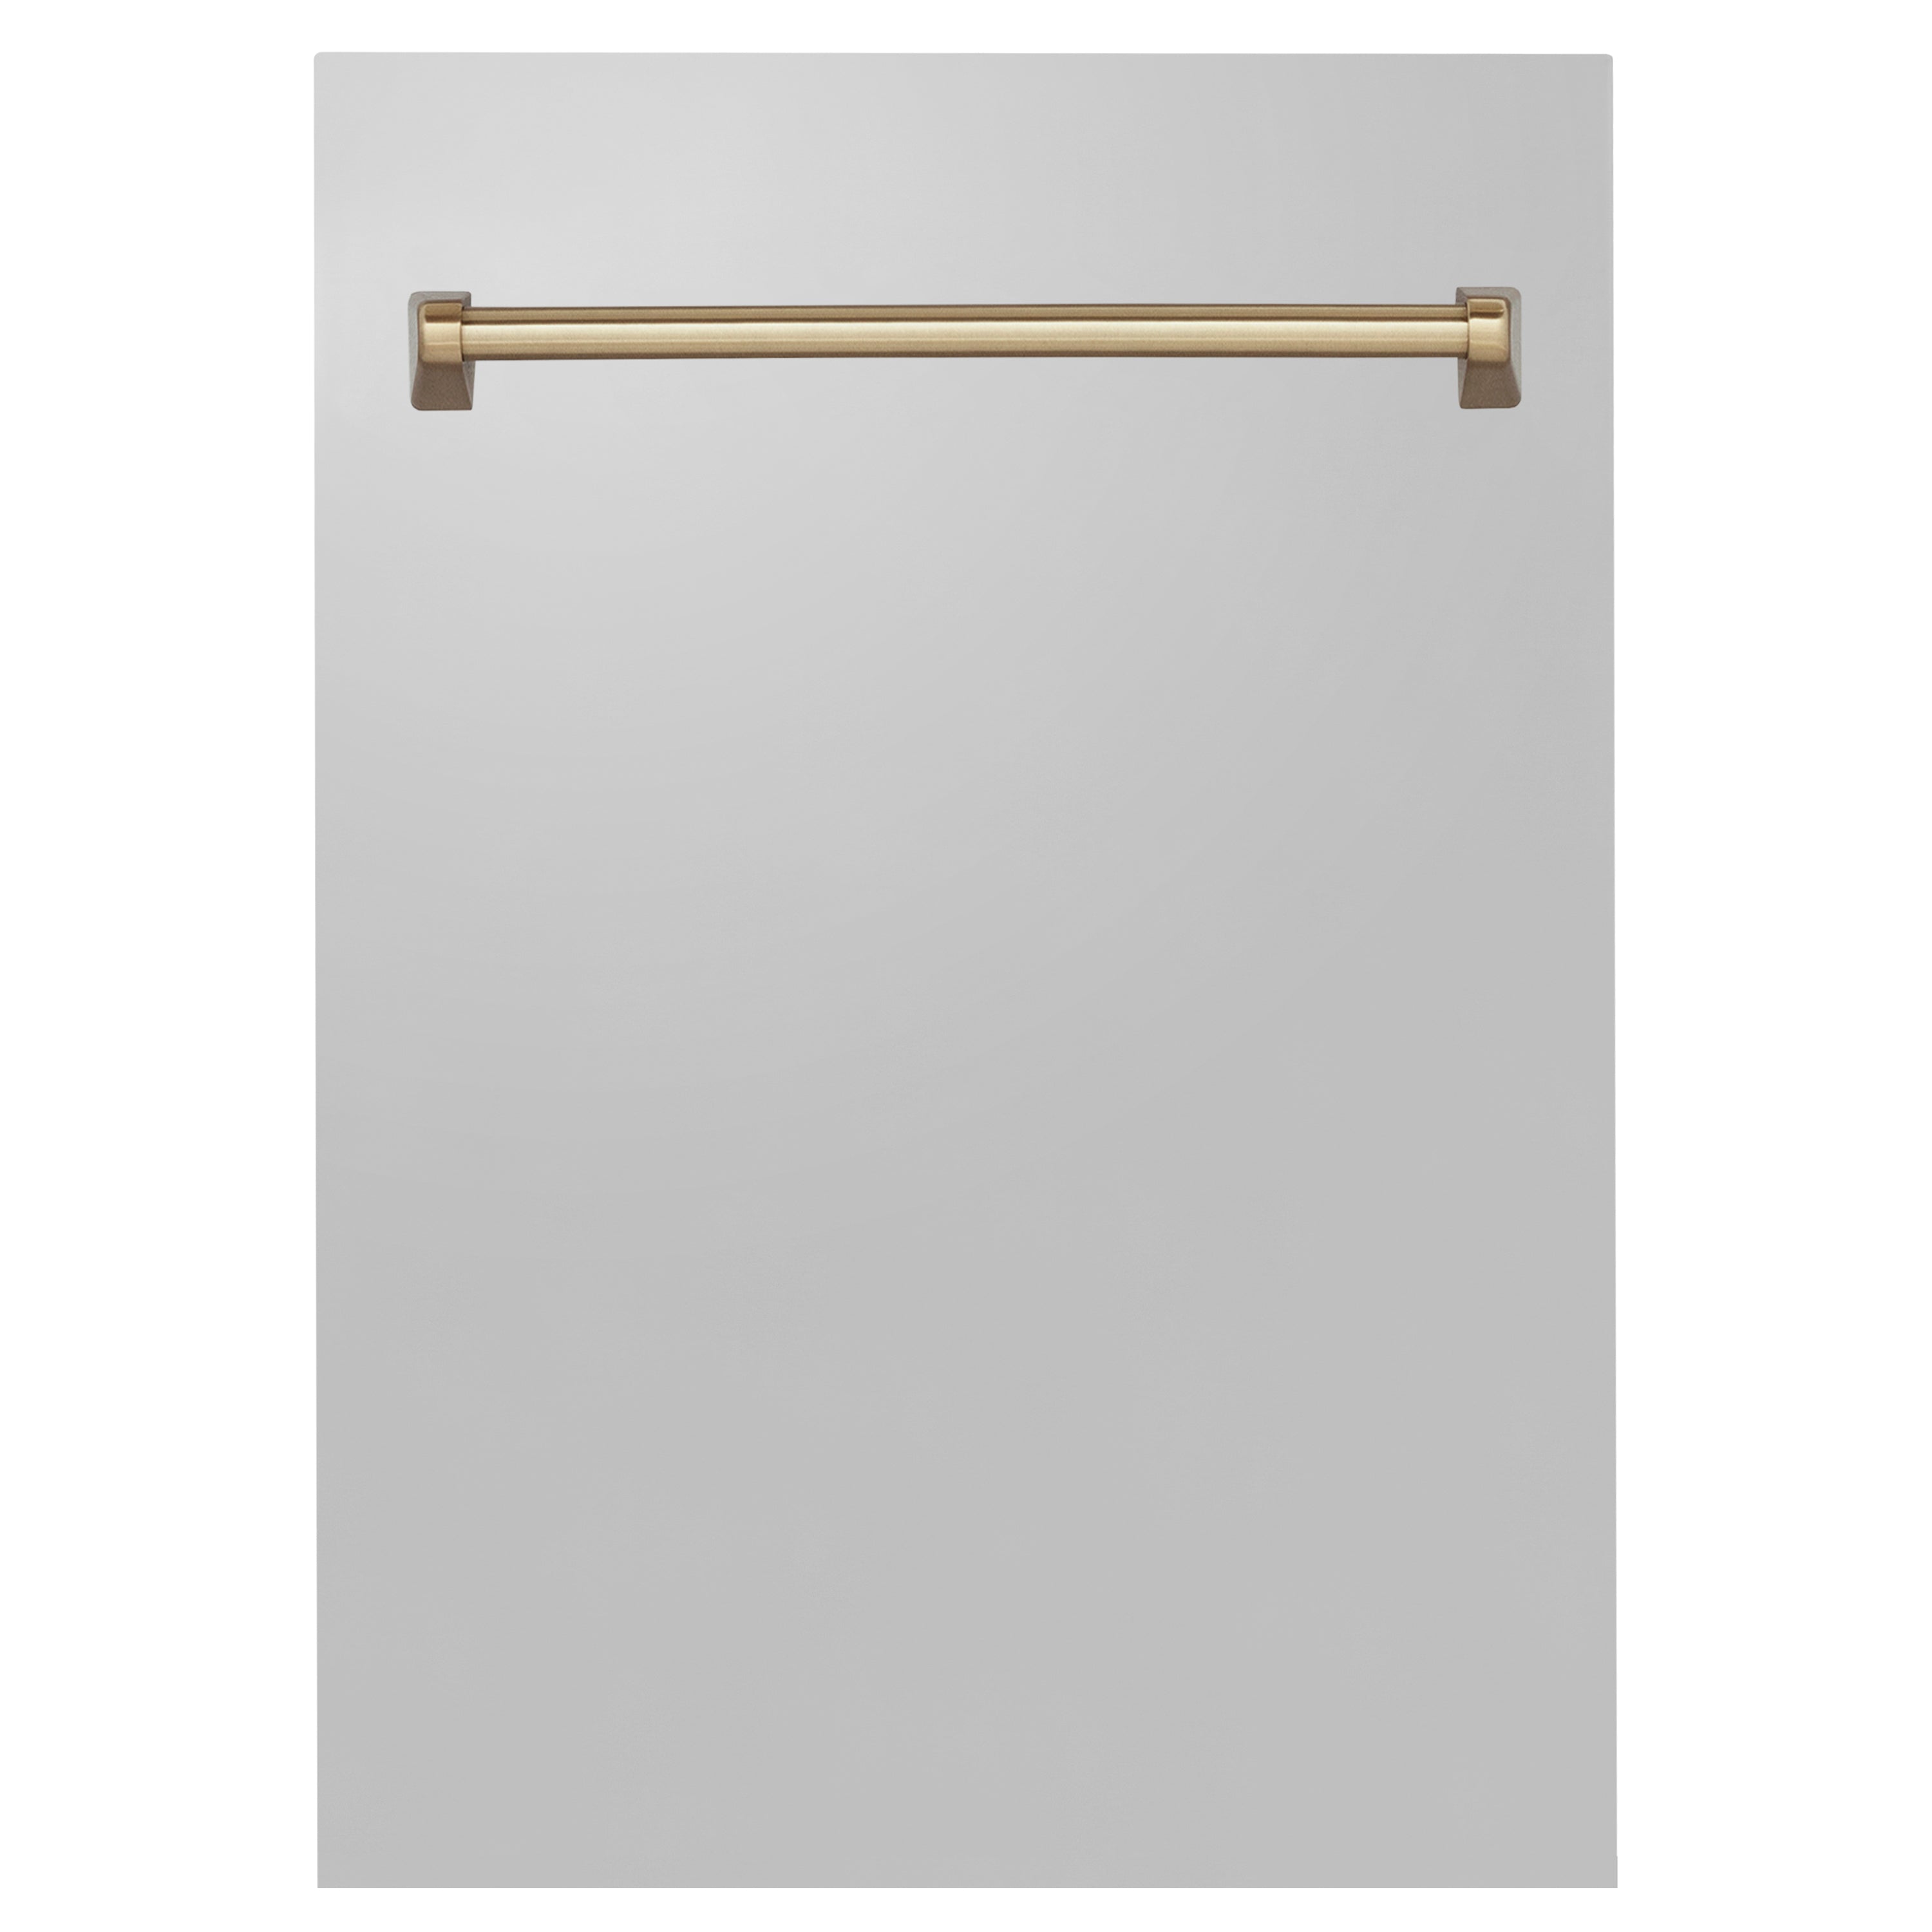 ZLINE 18" Autograph Edition Tallac Dishwasher Panel in Stainless Steel with Champagne Bronze Handle (DPVZ-304-18-CB)